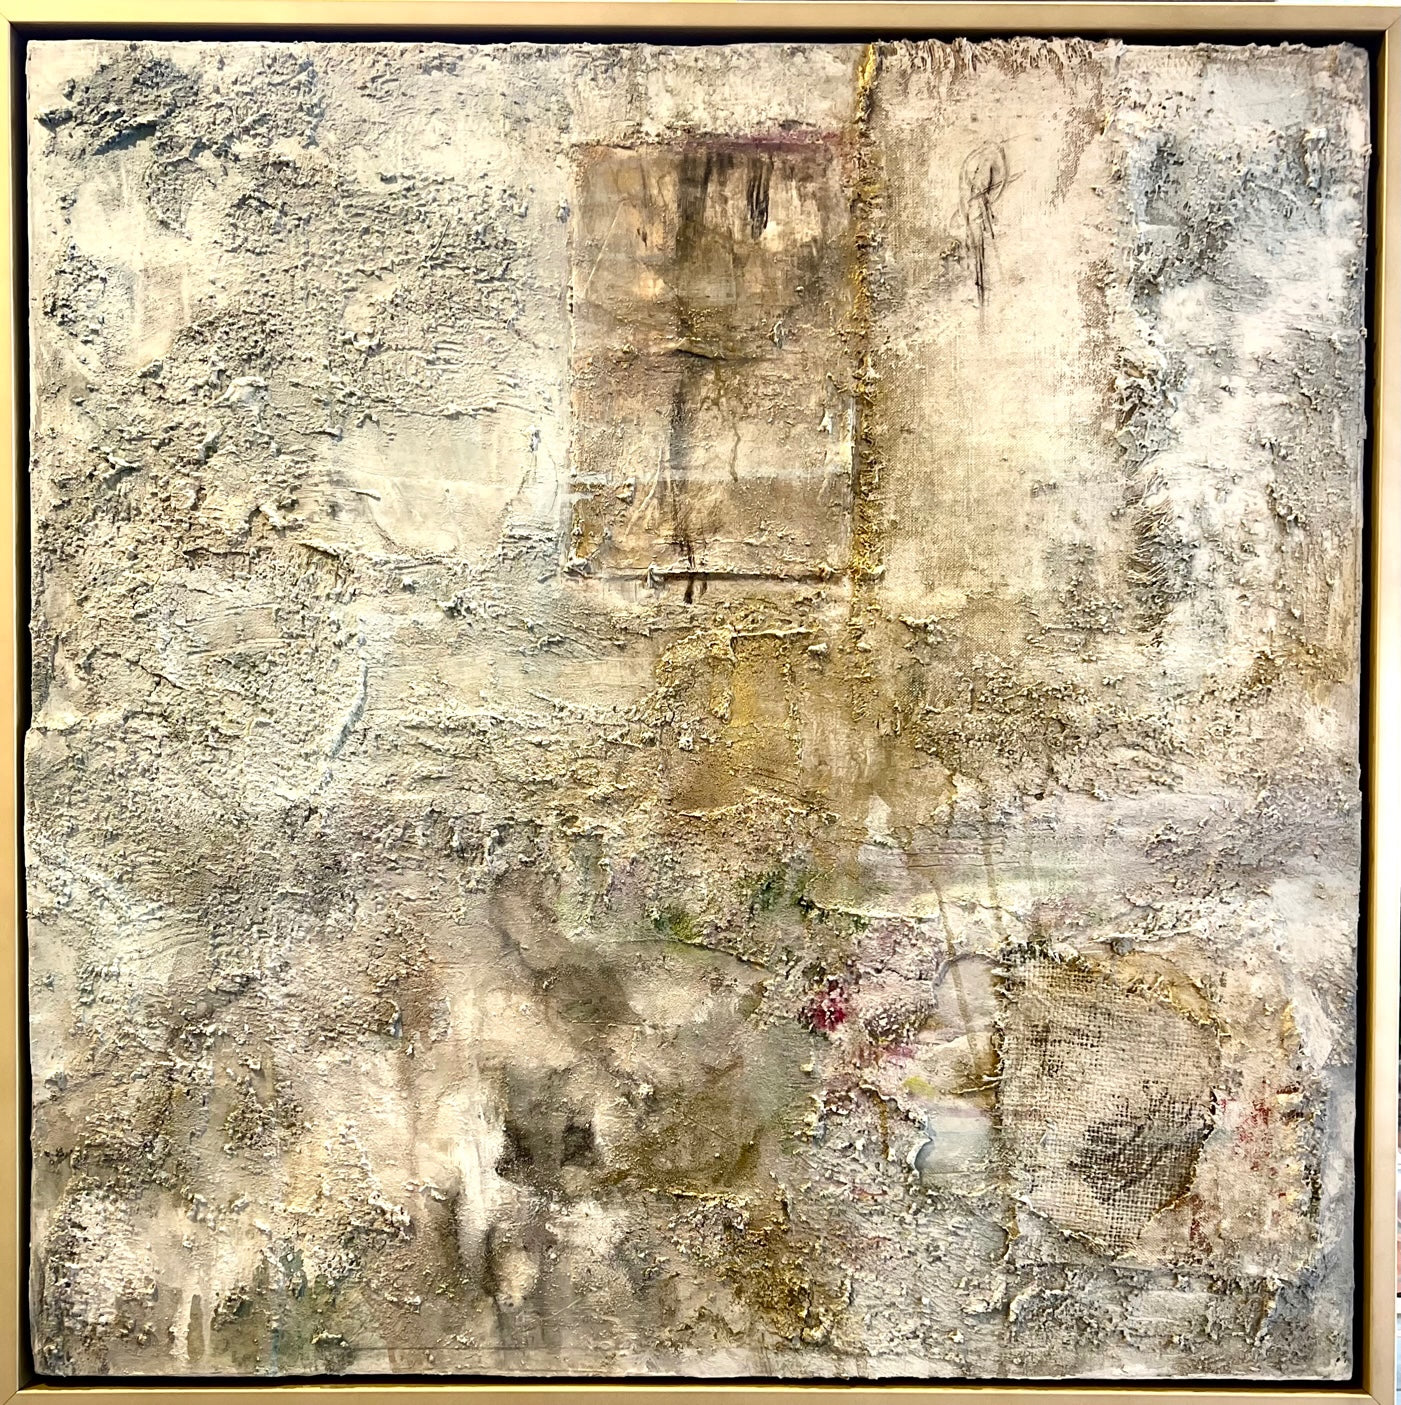 Story Told, mixed media concrete 24" x 24"